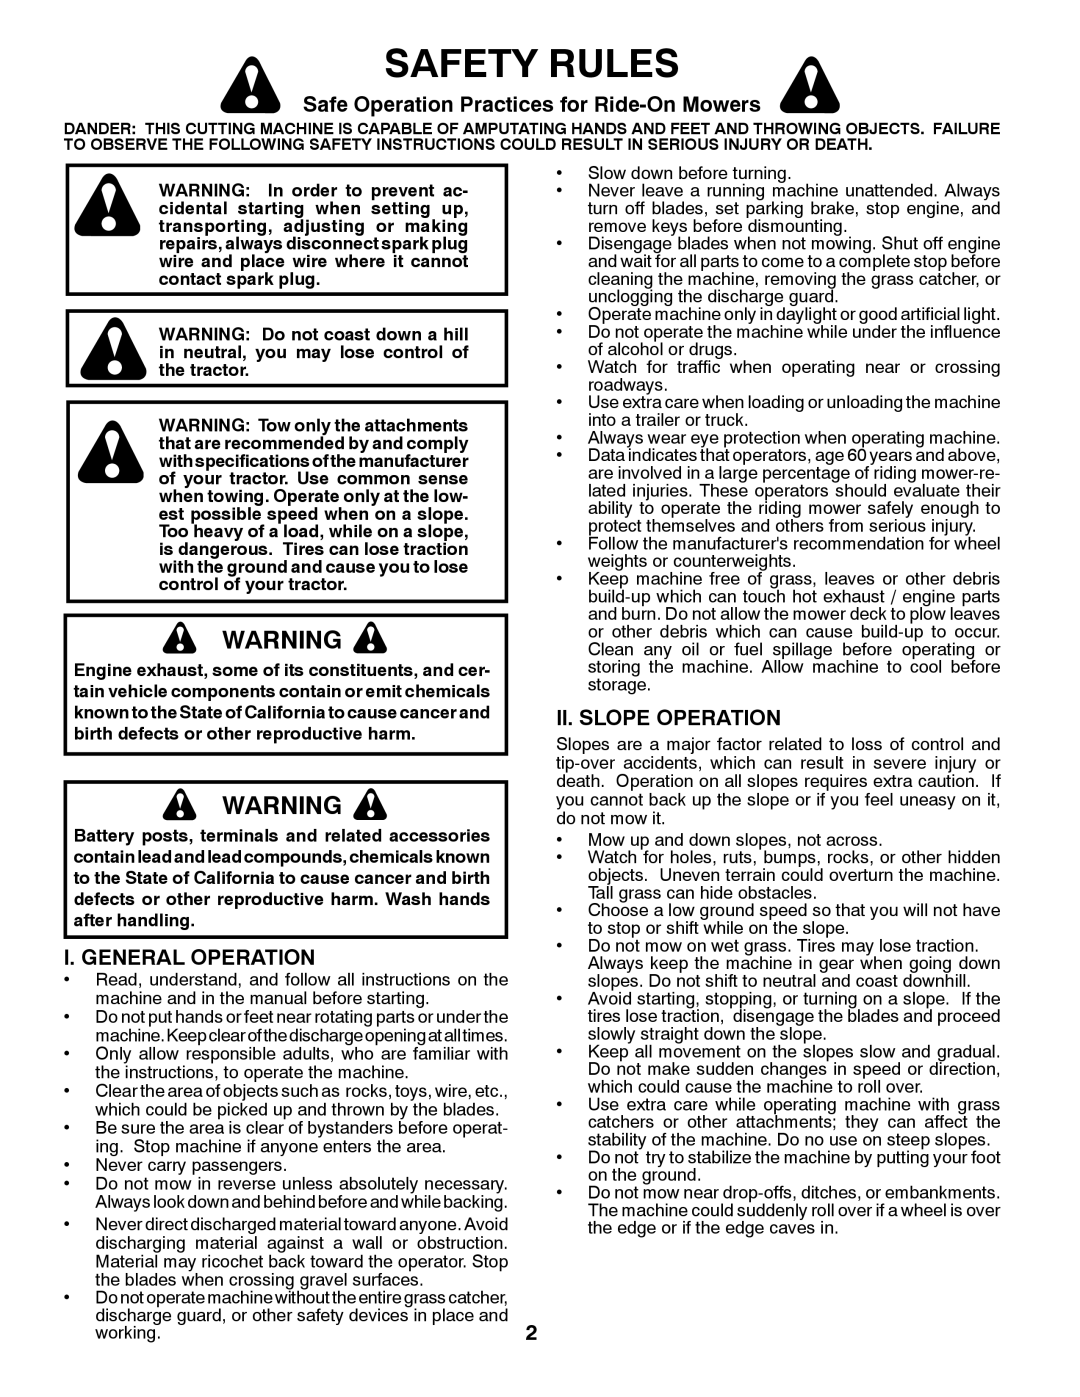 Husqvarna 96045000504 Safety Rules, Safe Operation Practices for Ride-OnMowers, I. General Operation, Ii. Slope Operation 